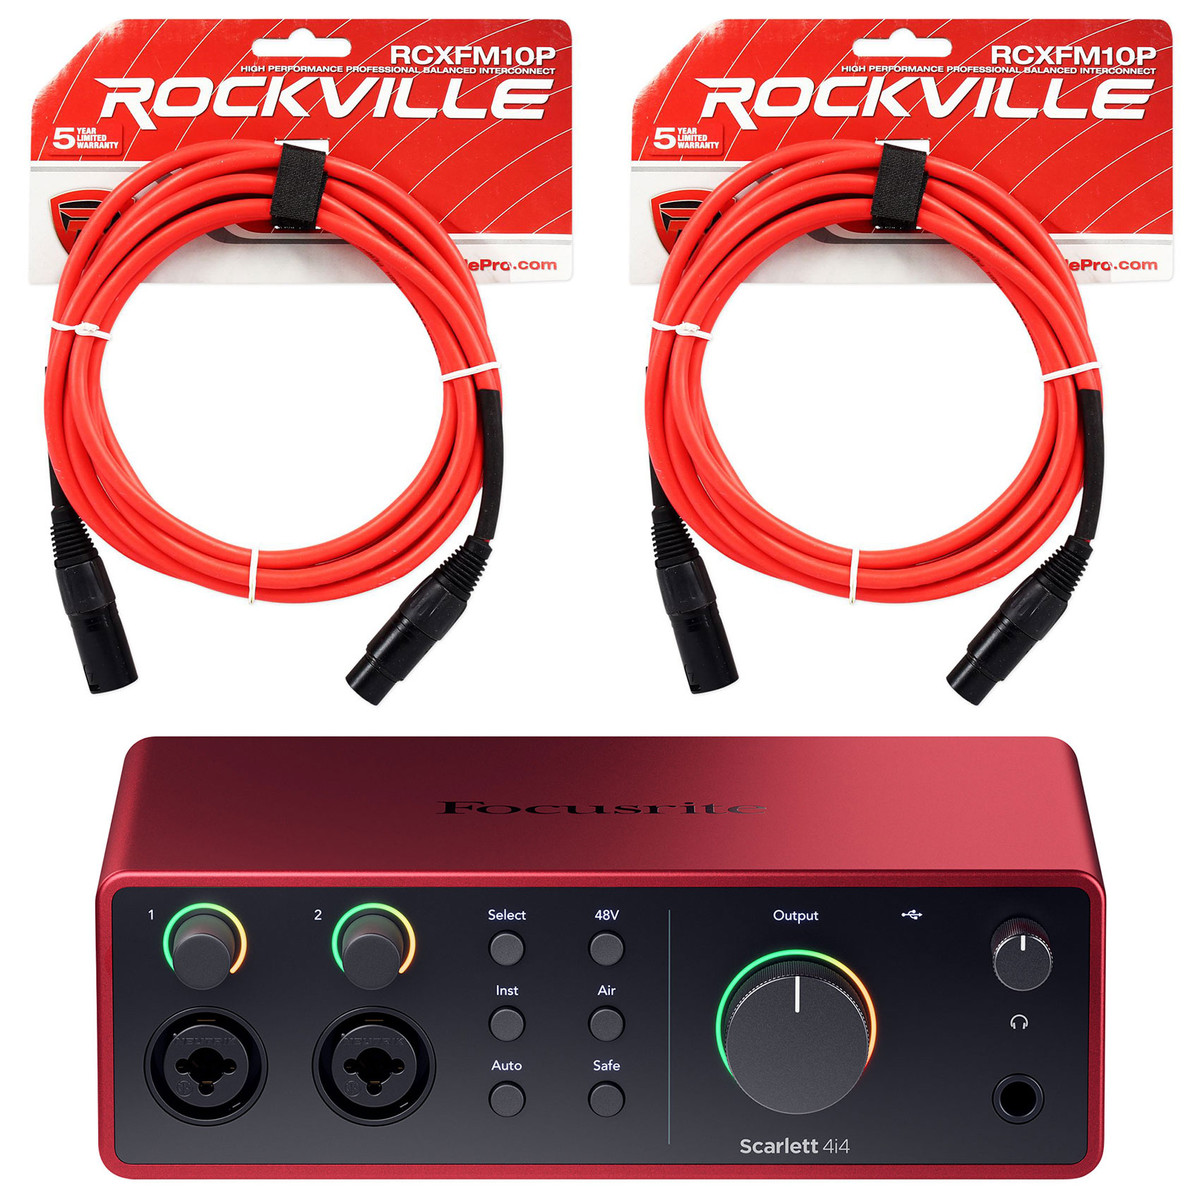 Focusrite Scarlett 2i2 Audio Interface with Cables